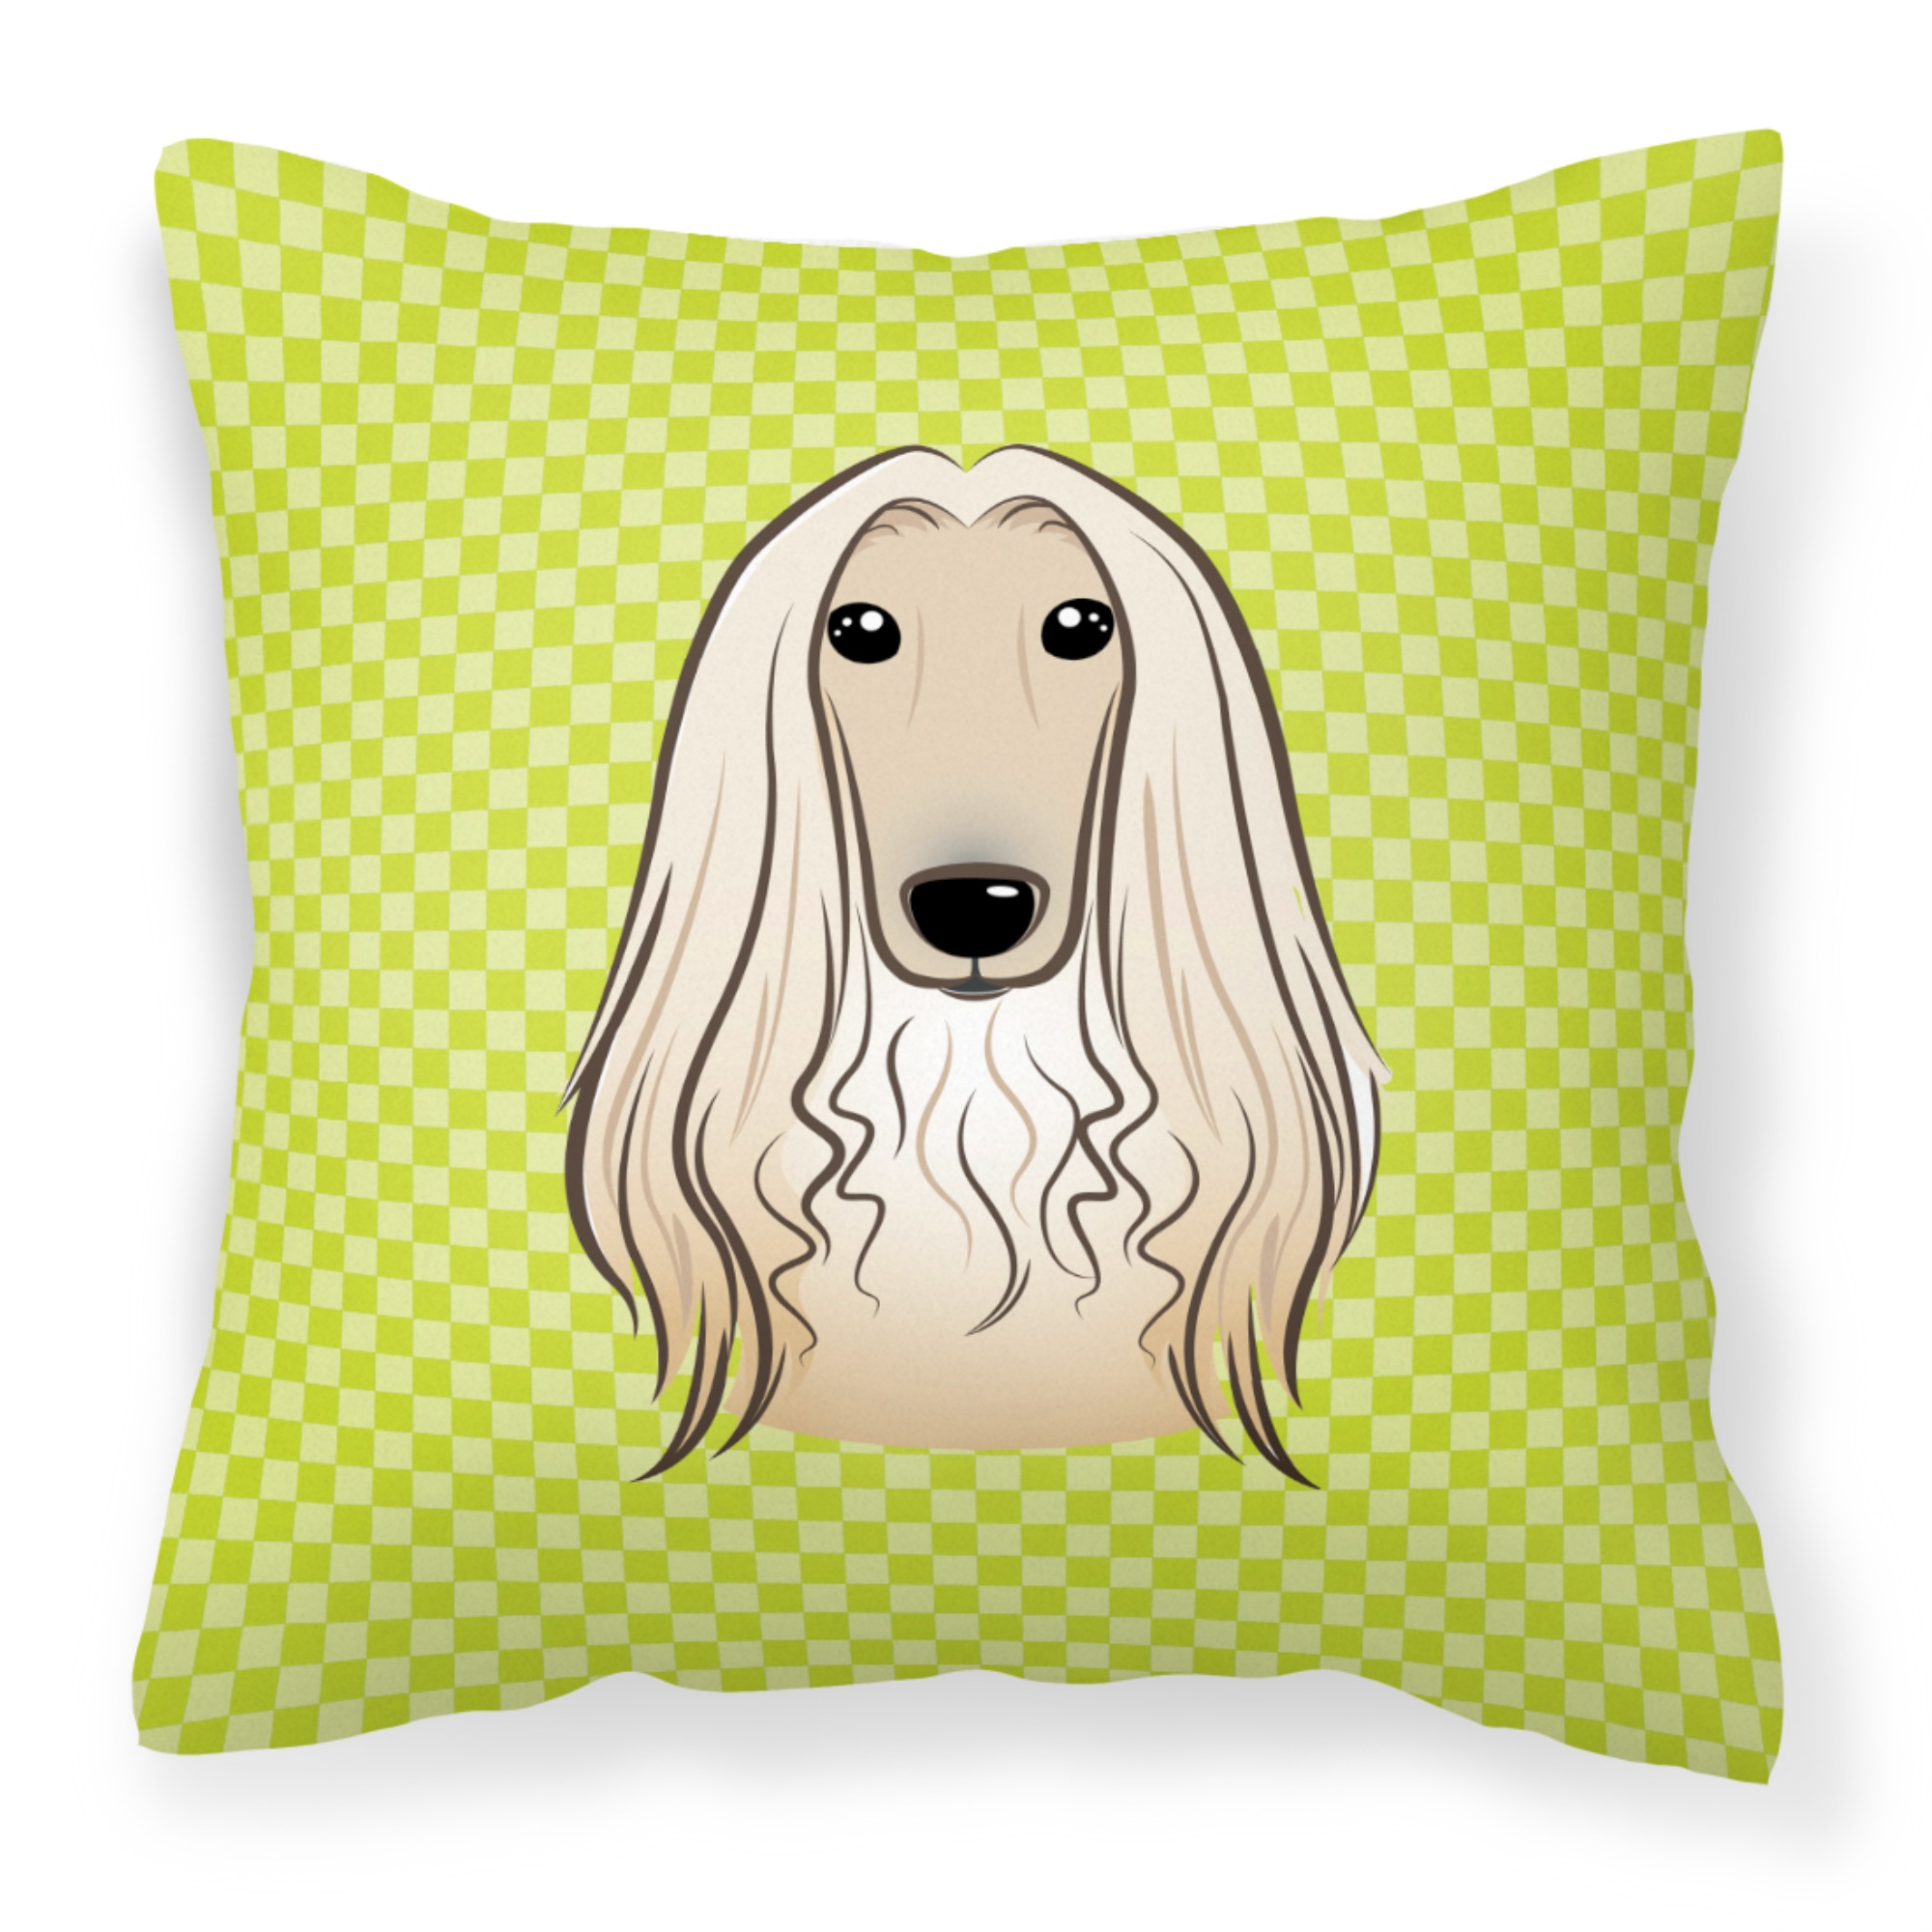 Caroline's Treasures "Caroline's Treasures BB1306PW1818 Checkerboard Lime Green Afghan Hound Pillow, 18"" x 18"", Multicolor"